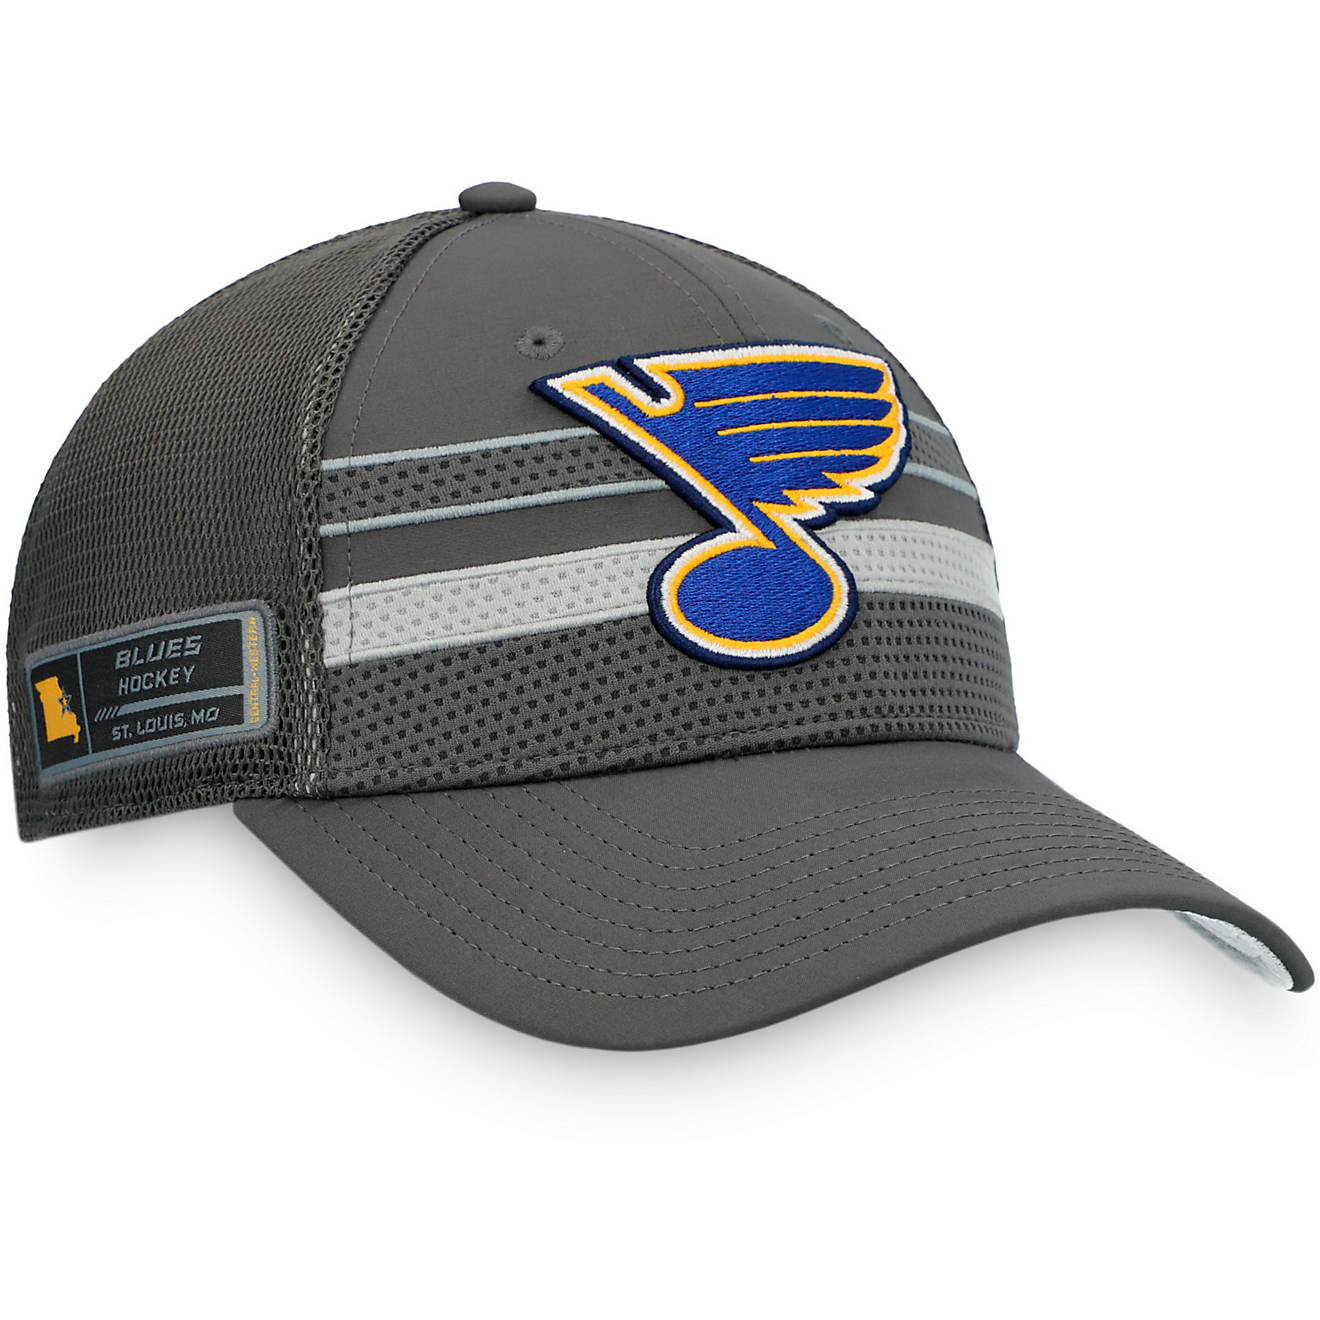 Fanatics Men's St. Louis Blues Hockey Fights Cancer Structured Adjustable Cap                                                    - view number 1